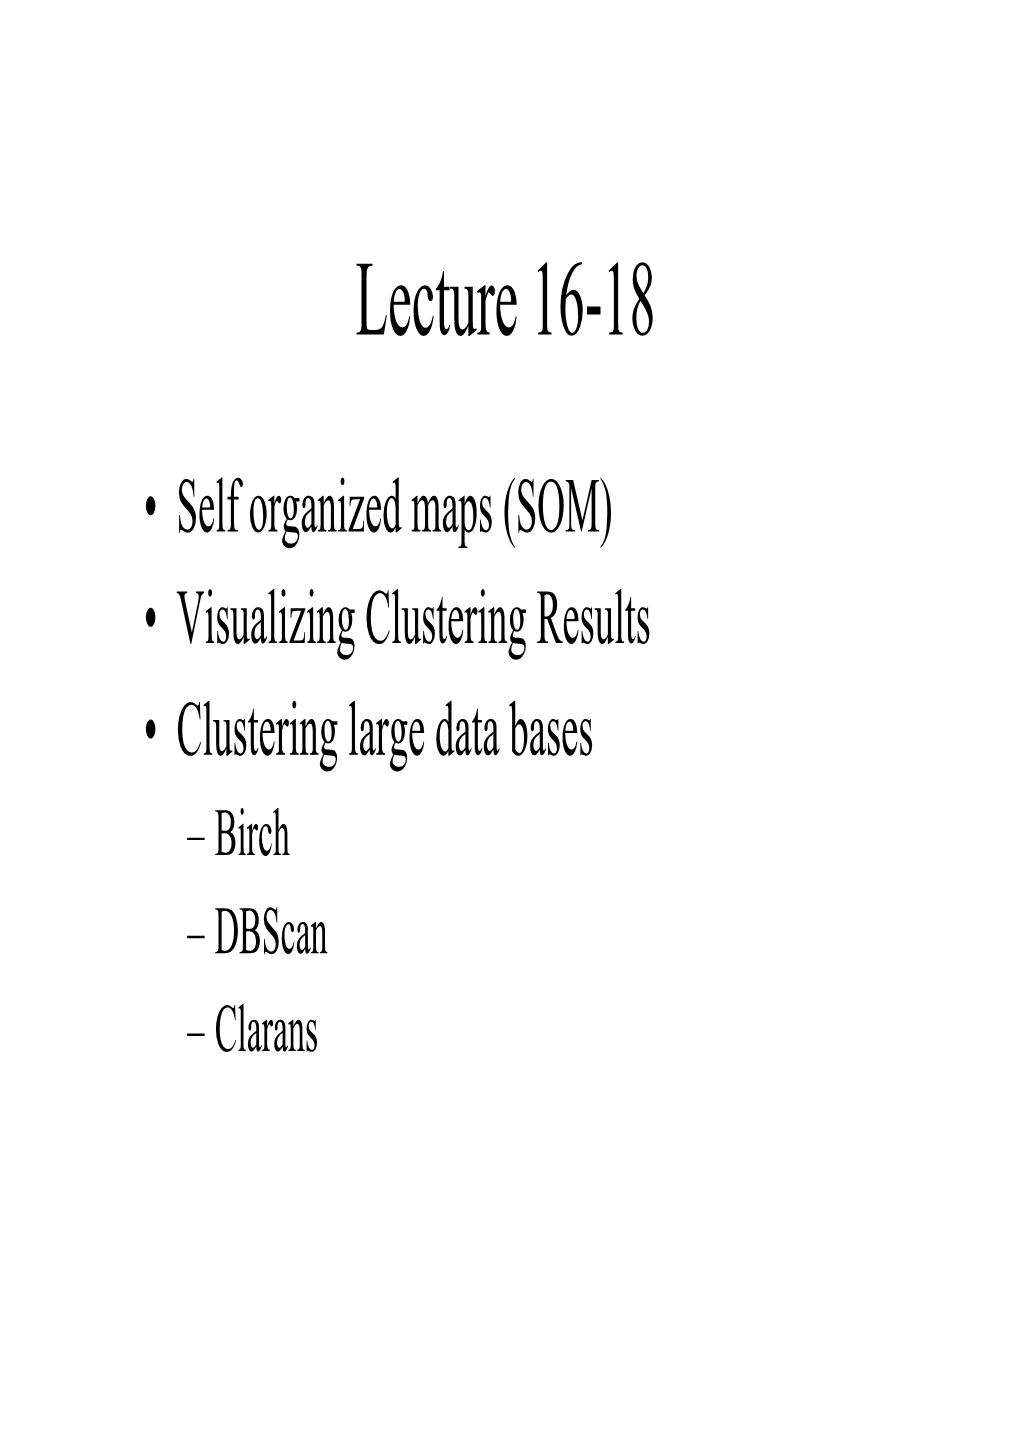 Lecture 16-18): Clustering Large Data Bases